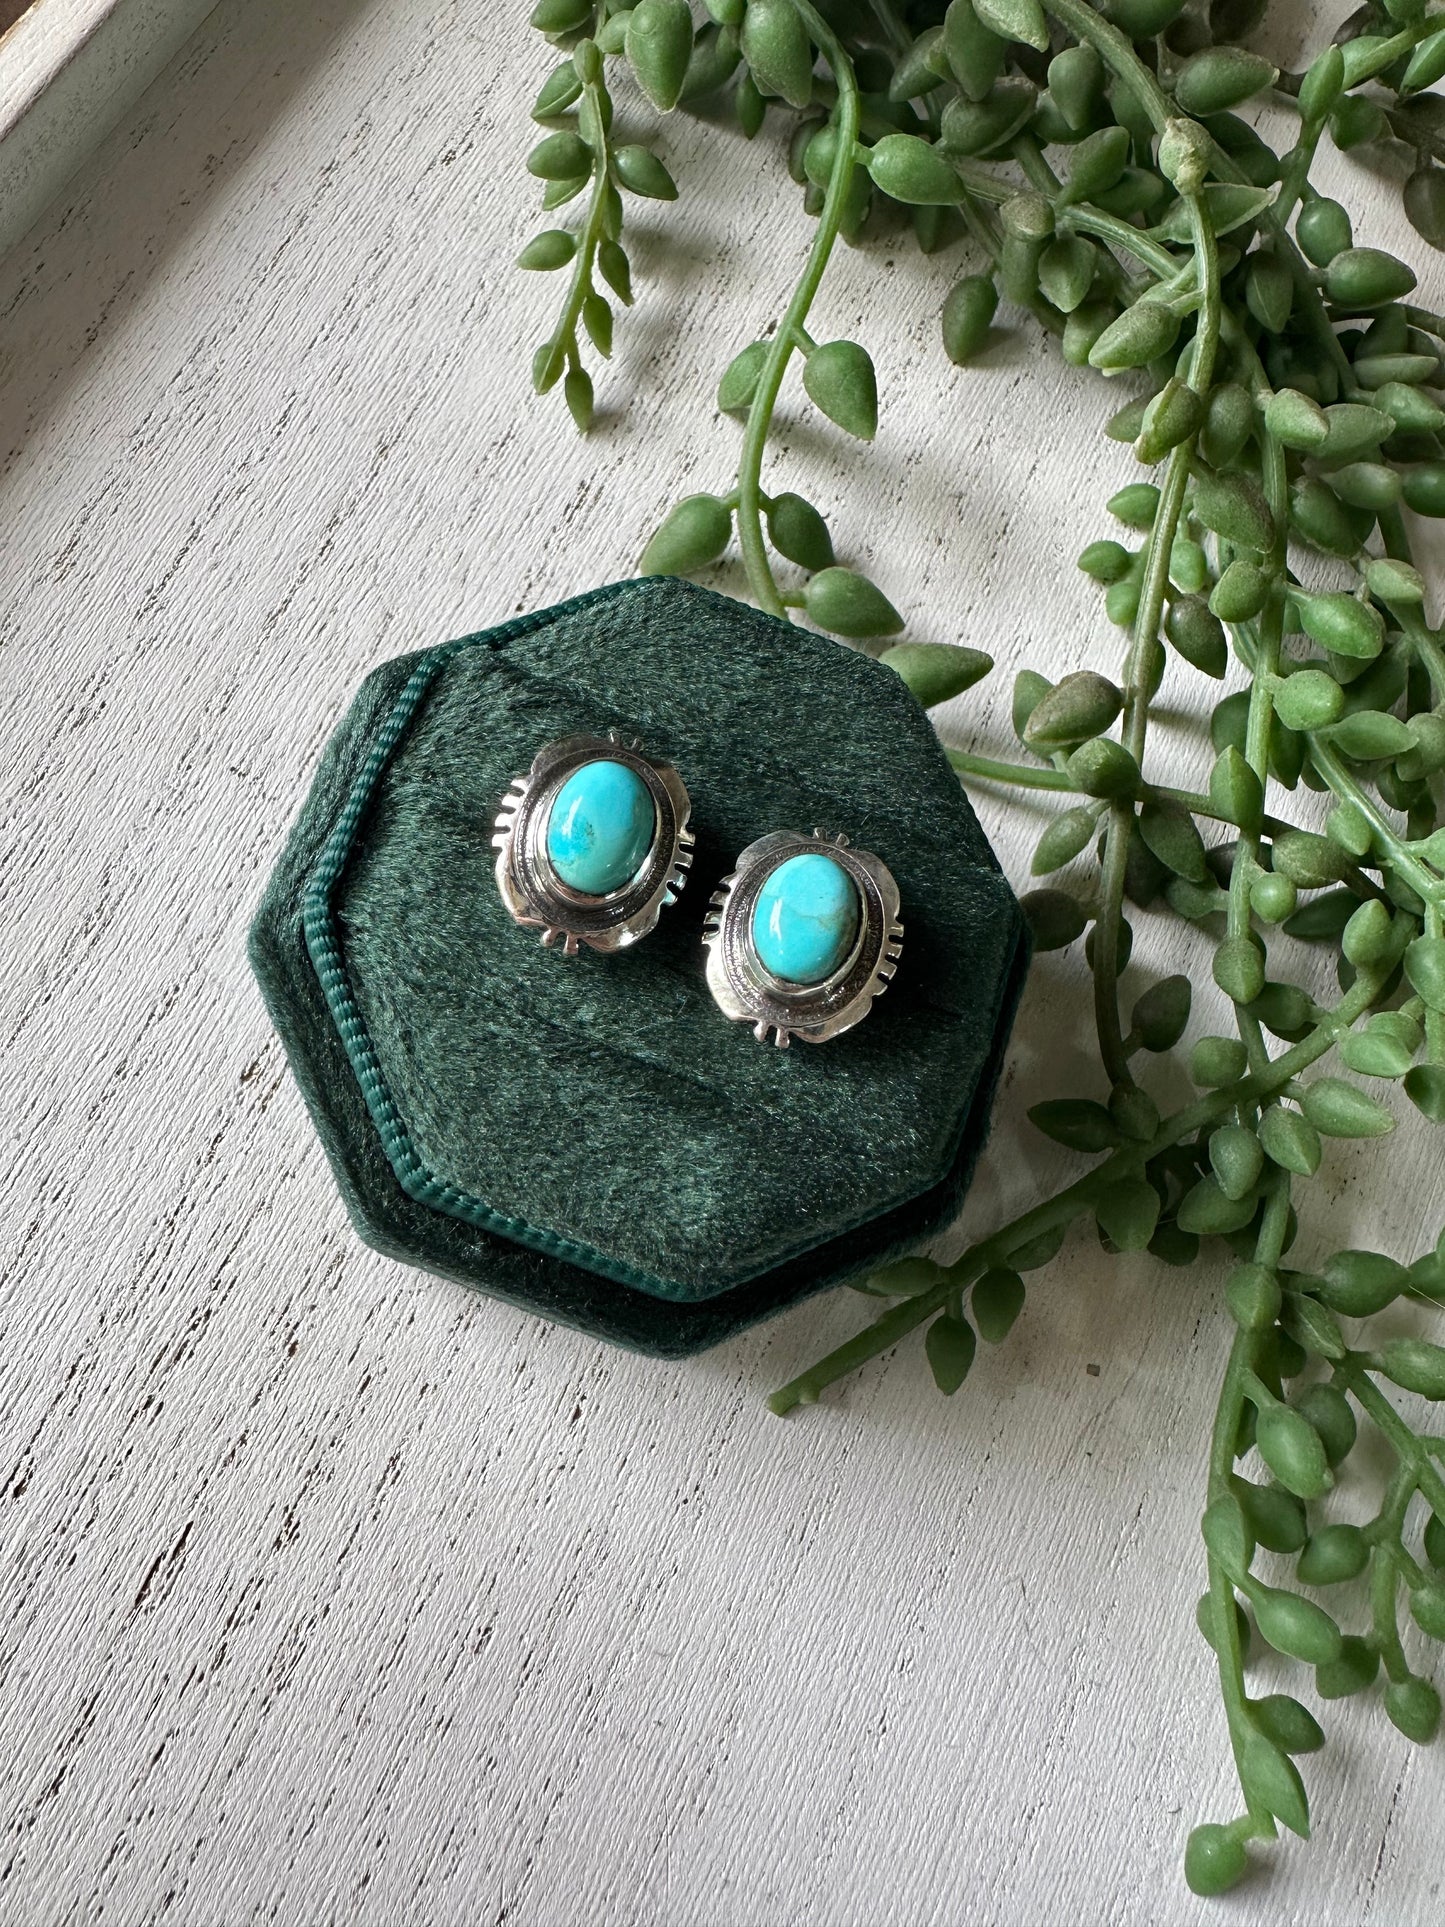 Handmade Turquoise And Sterling Silver Stud Earrings